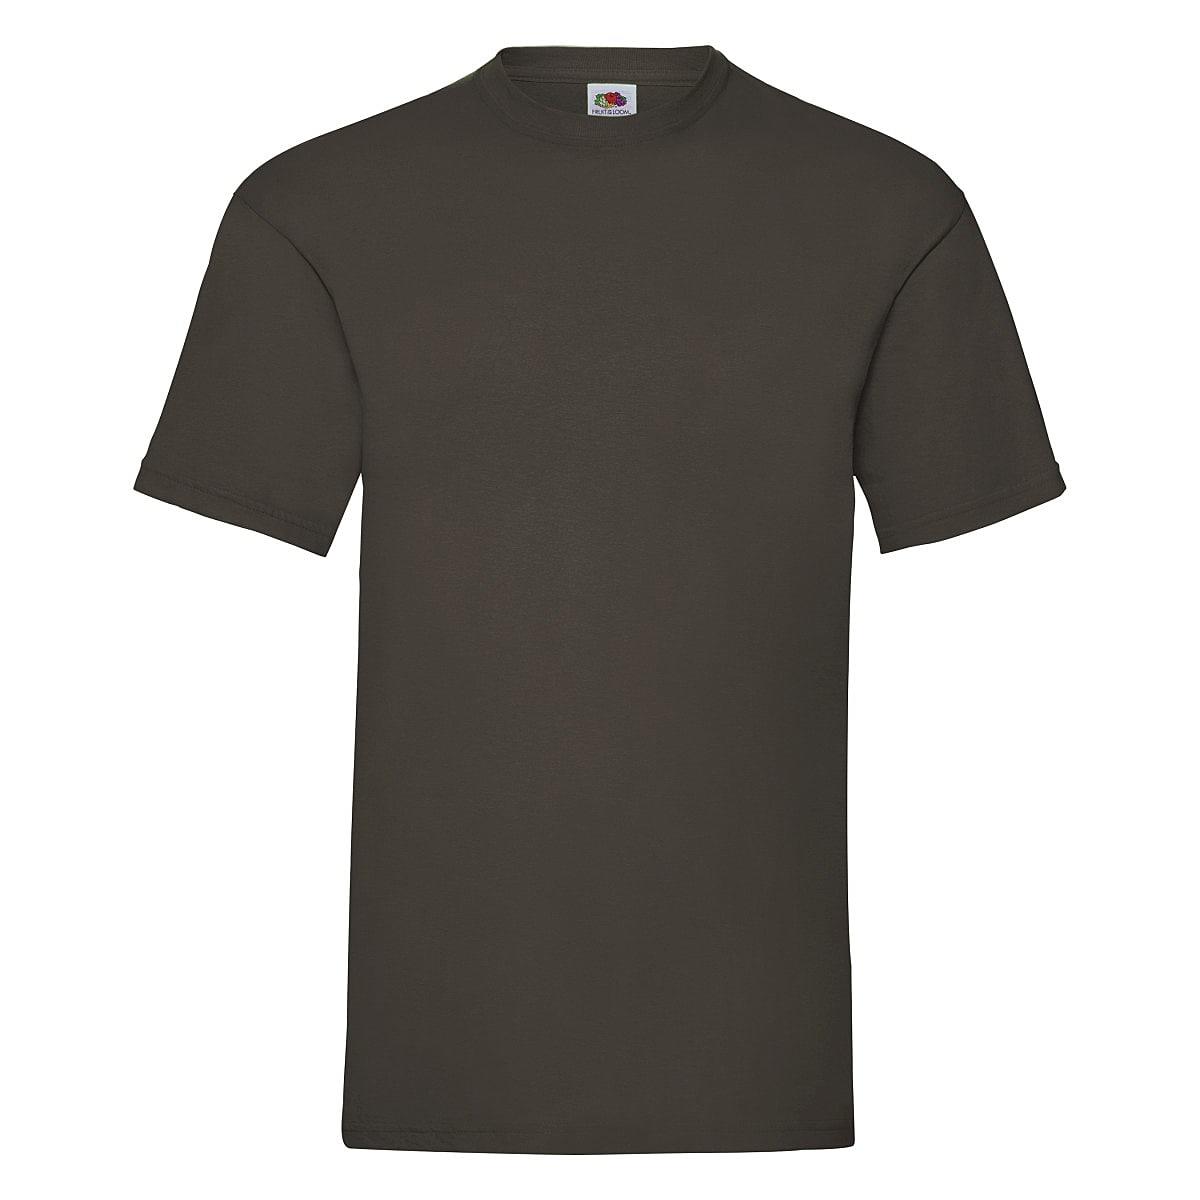 Fruit Of The Loom Valueweight T-Shirt in Chocolate (Product Code: 61036)